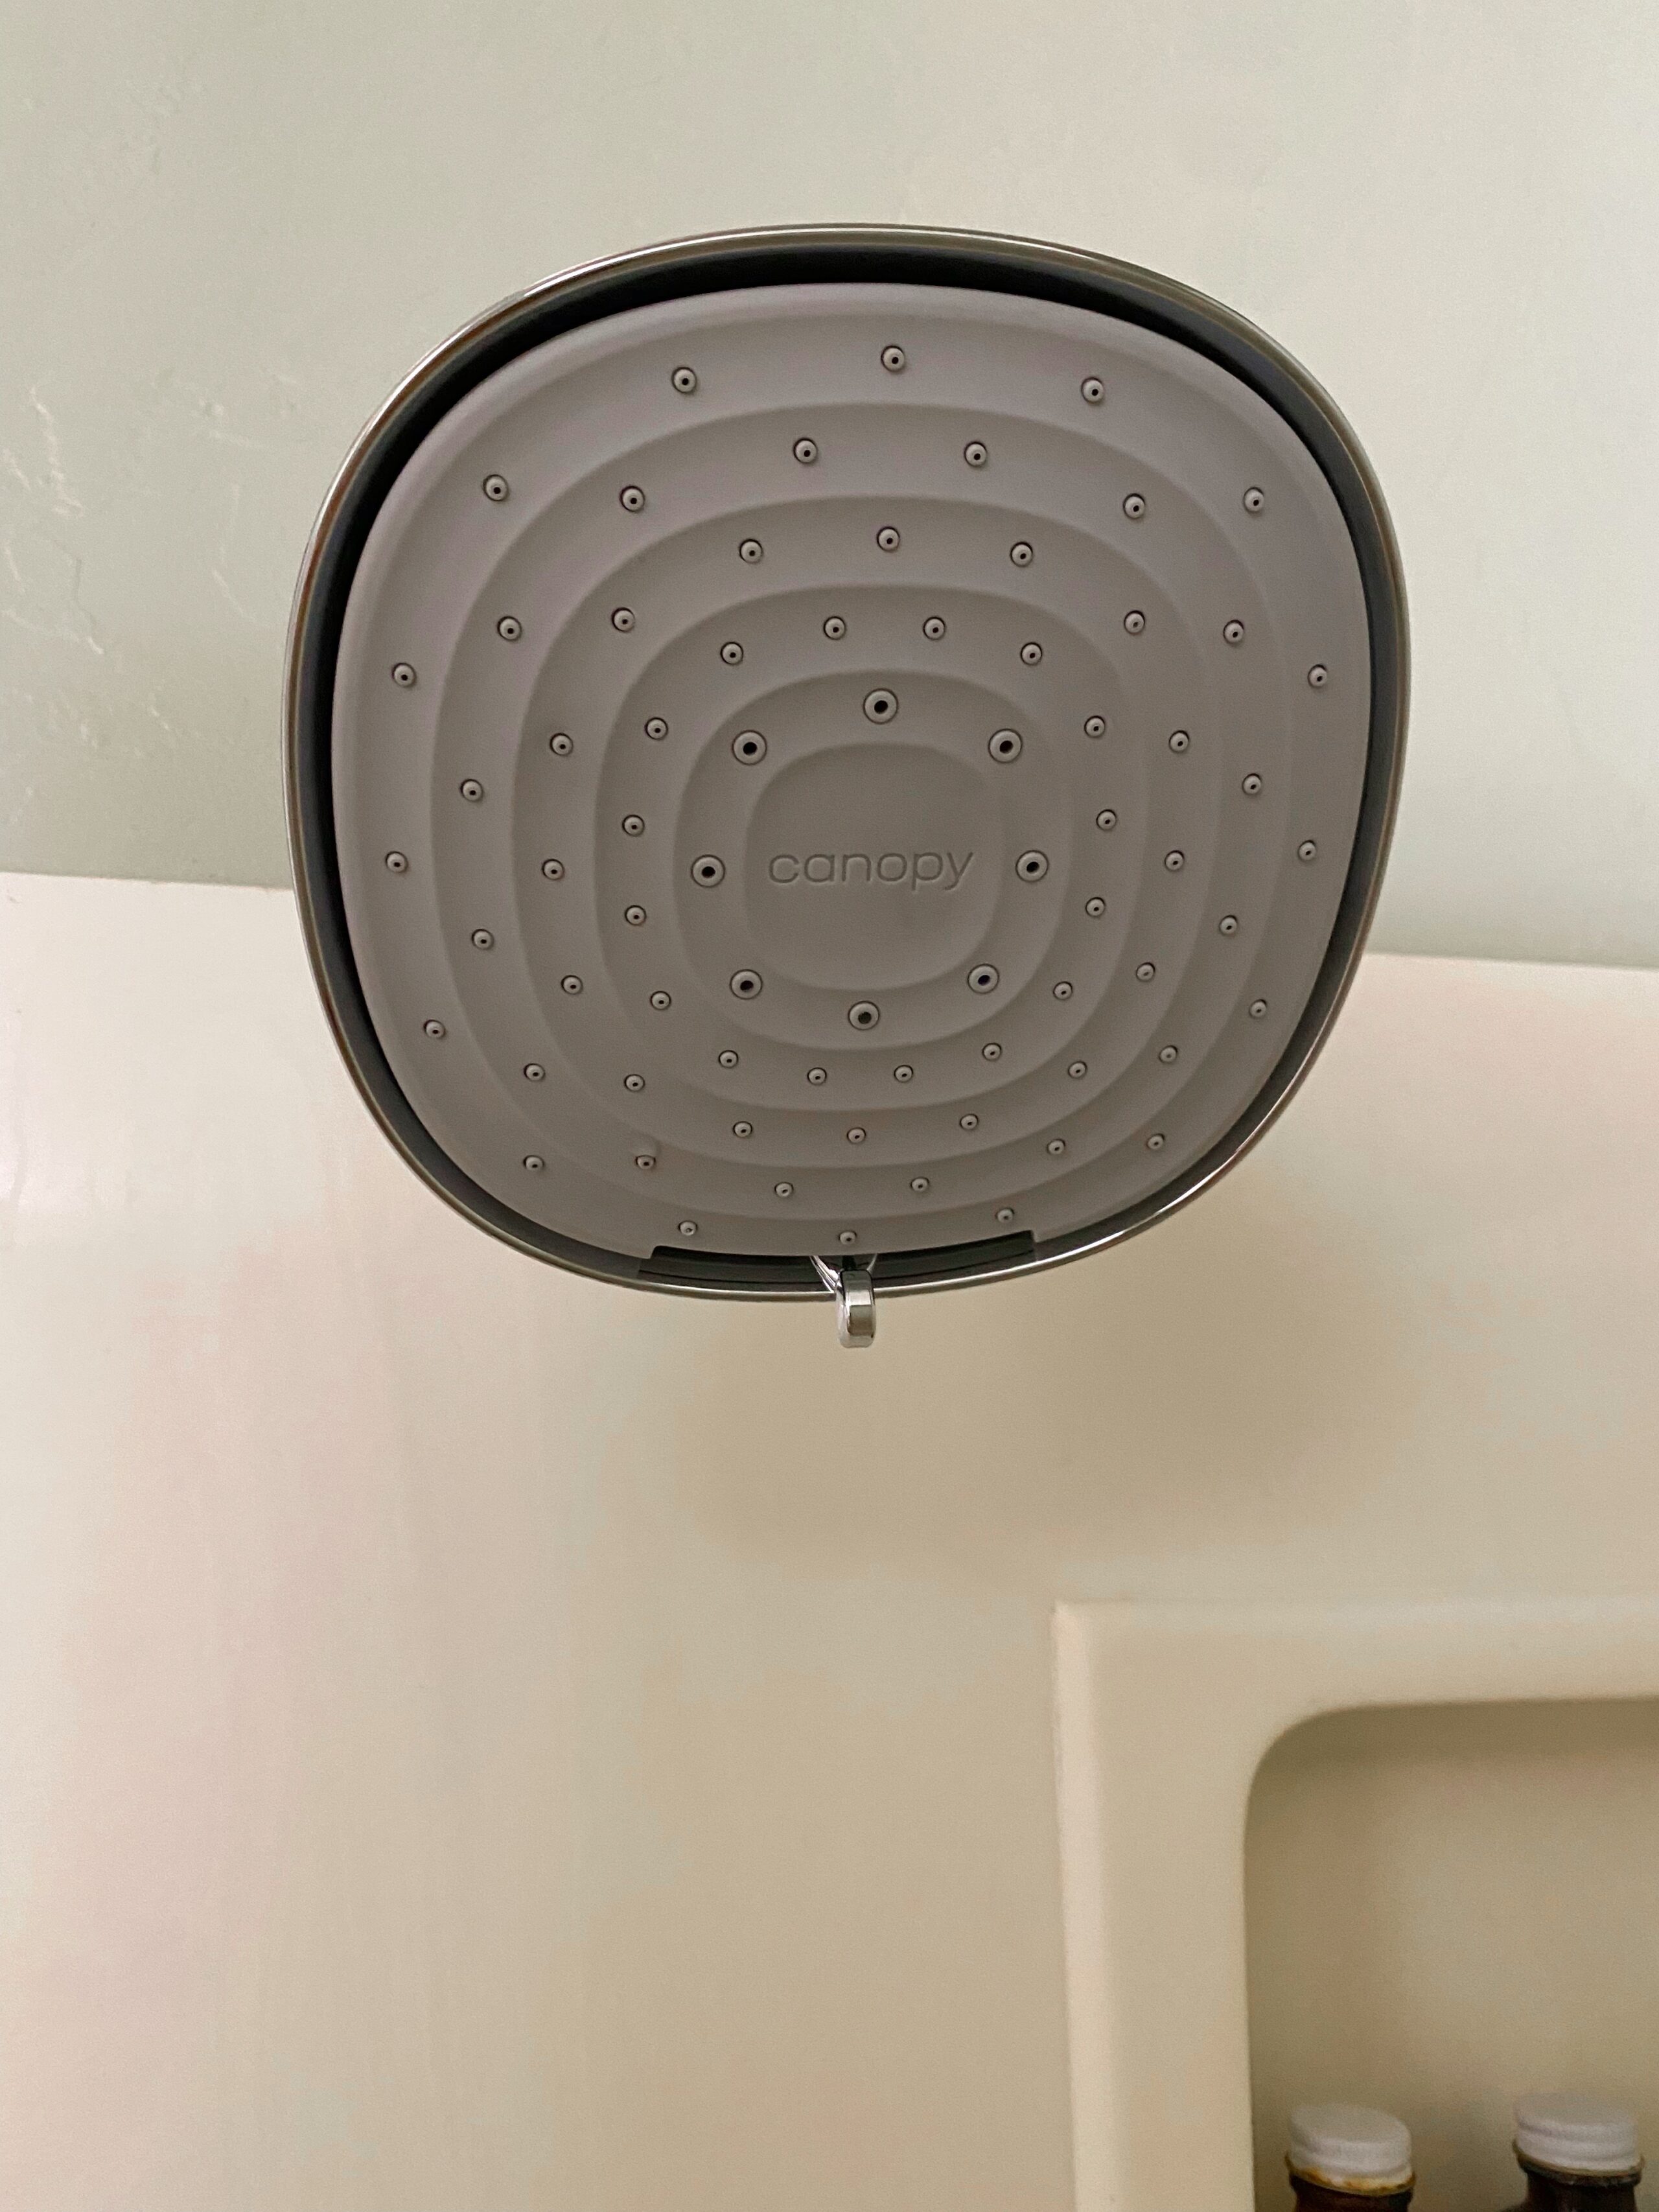 Canopy shower water filter review